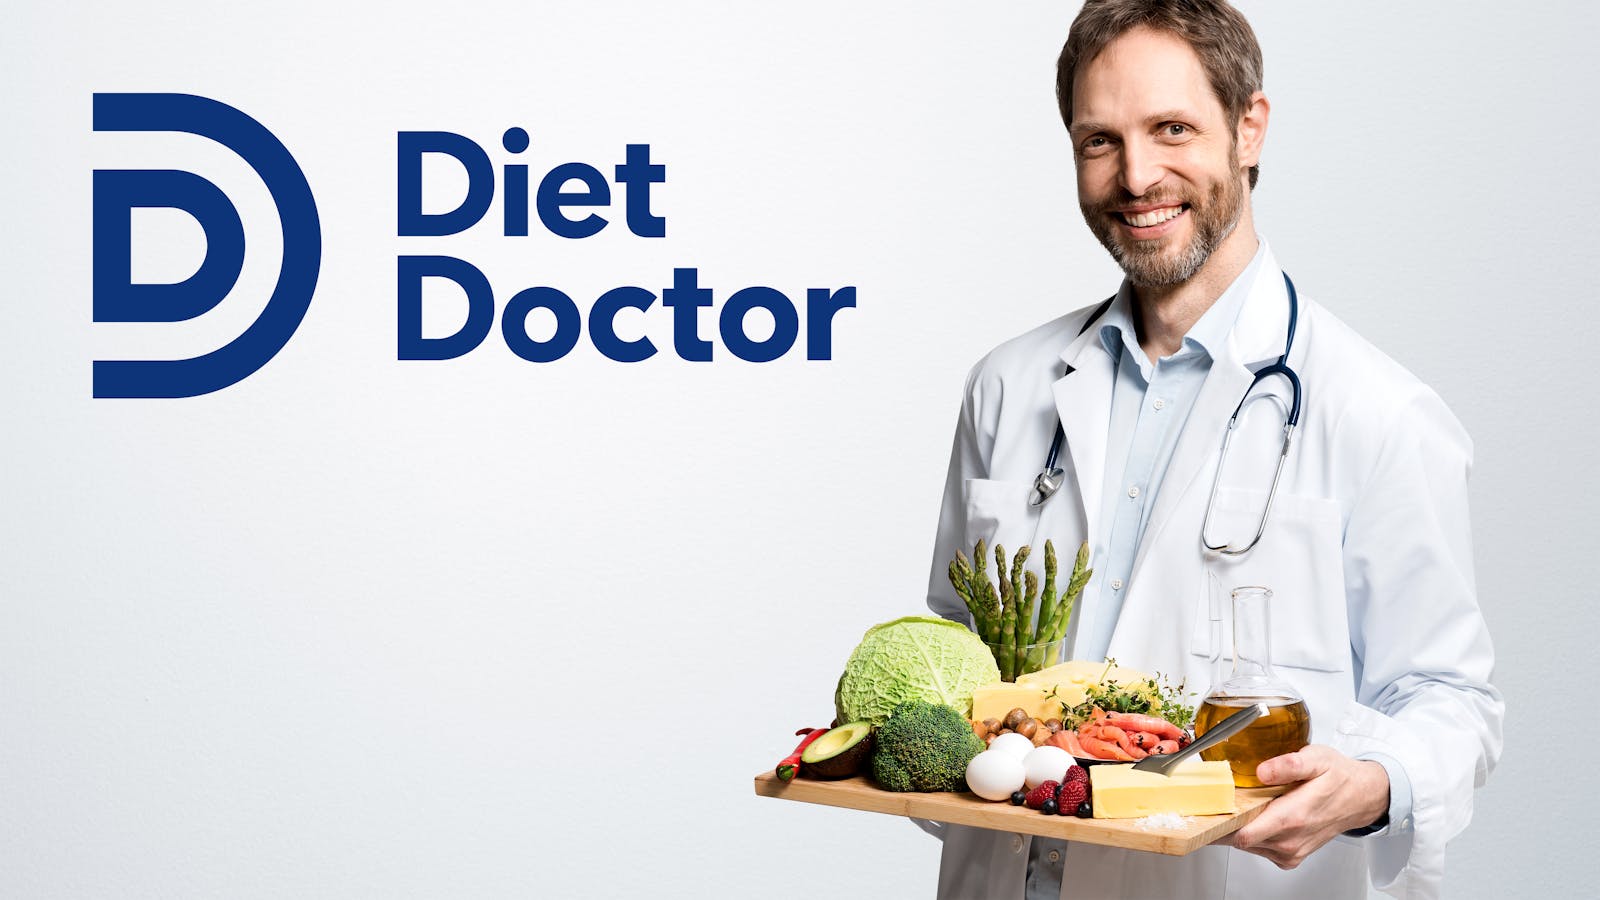 About Diet Doctor Our Purpose Mission And Values